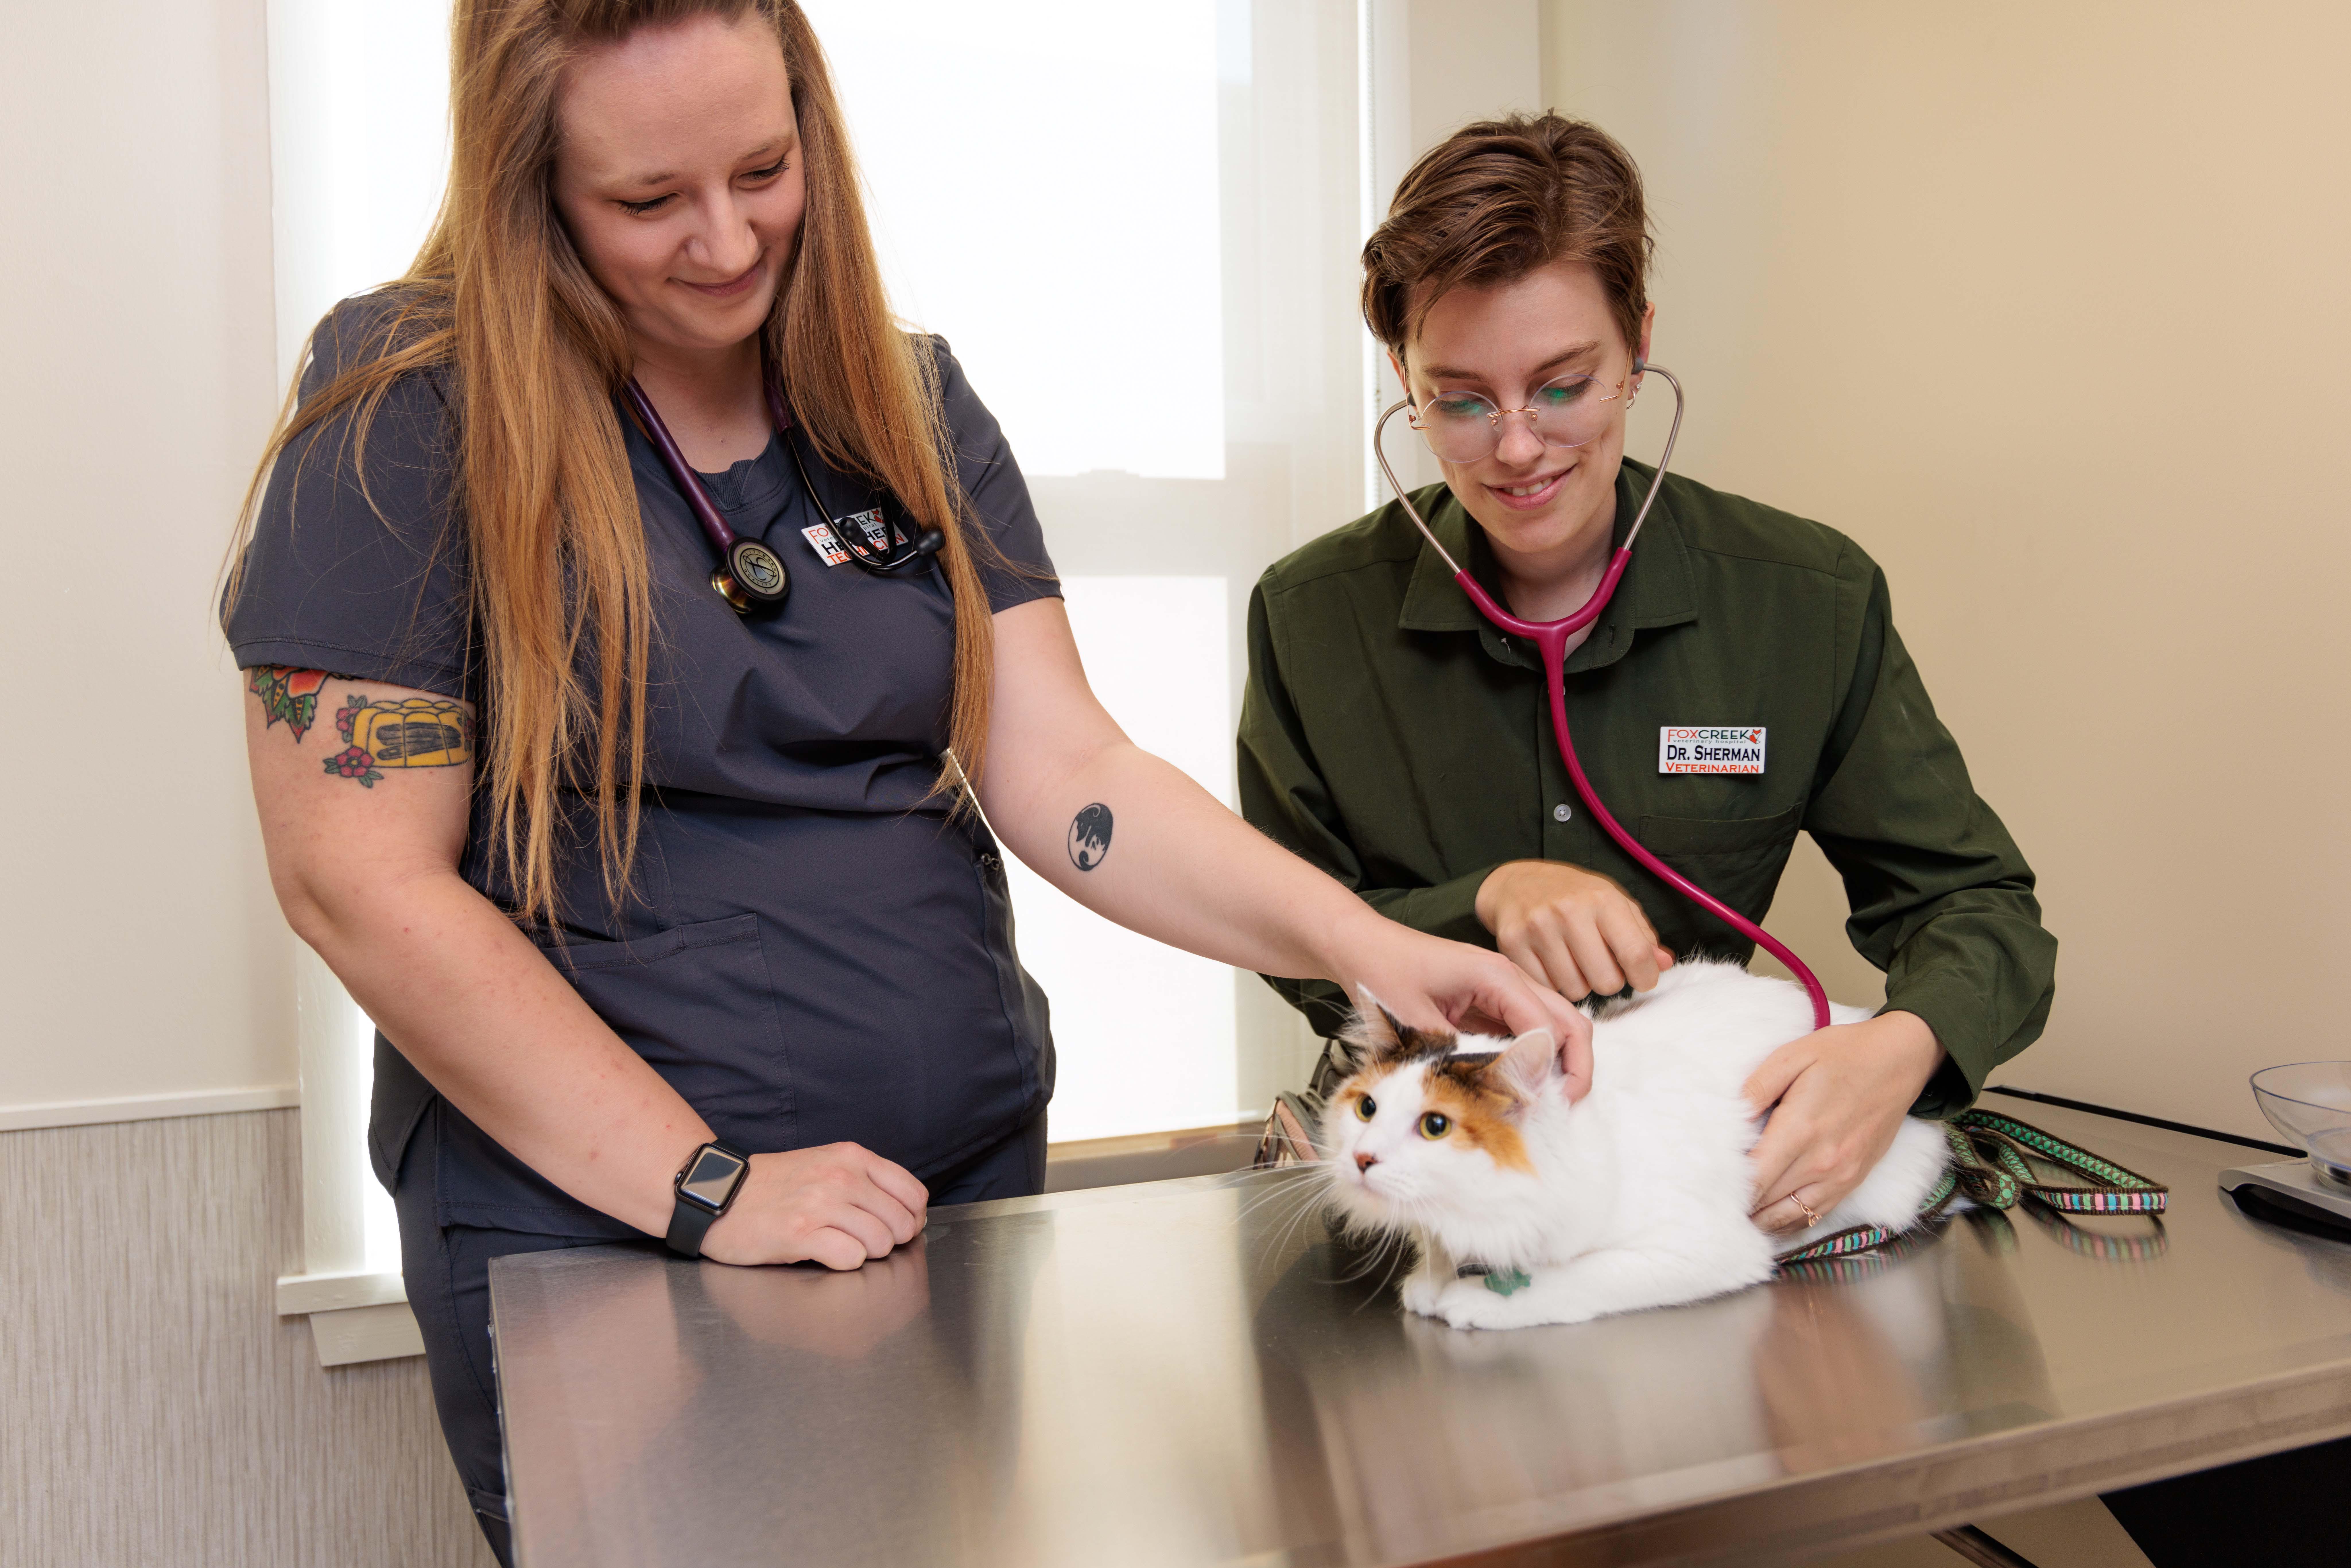 Here at Fox Creek, we know that routine care allows us to not only catch diseases early but sometimes prevent them altogether. Our team provides annual wellness exams and vaccinations, compassionate care for pets of all ages, and even microchipping to ensure the safety of your pet.